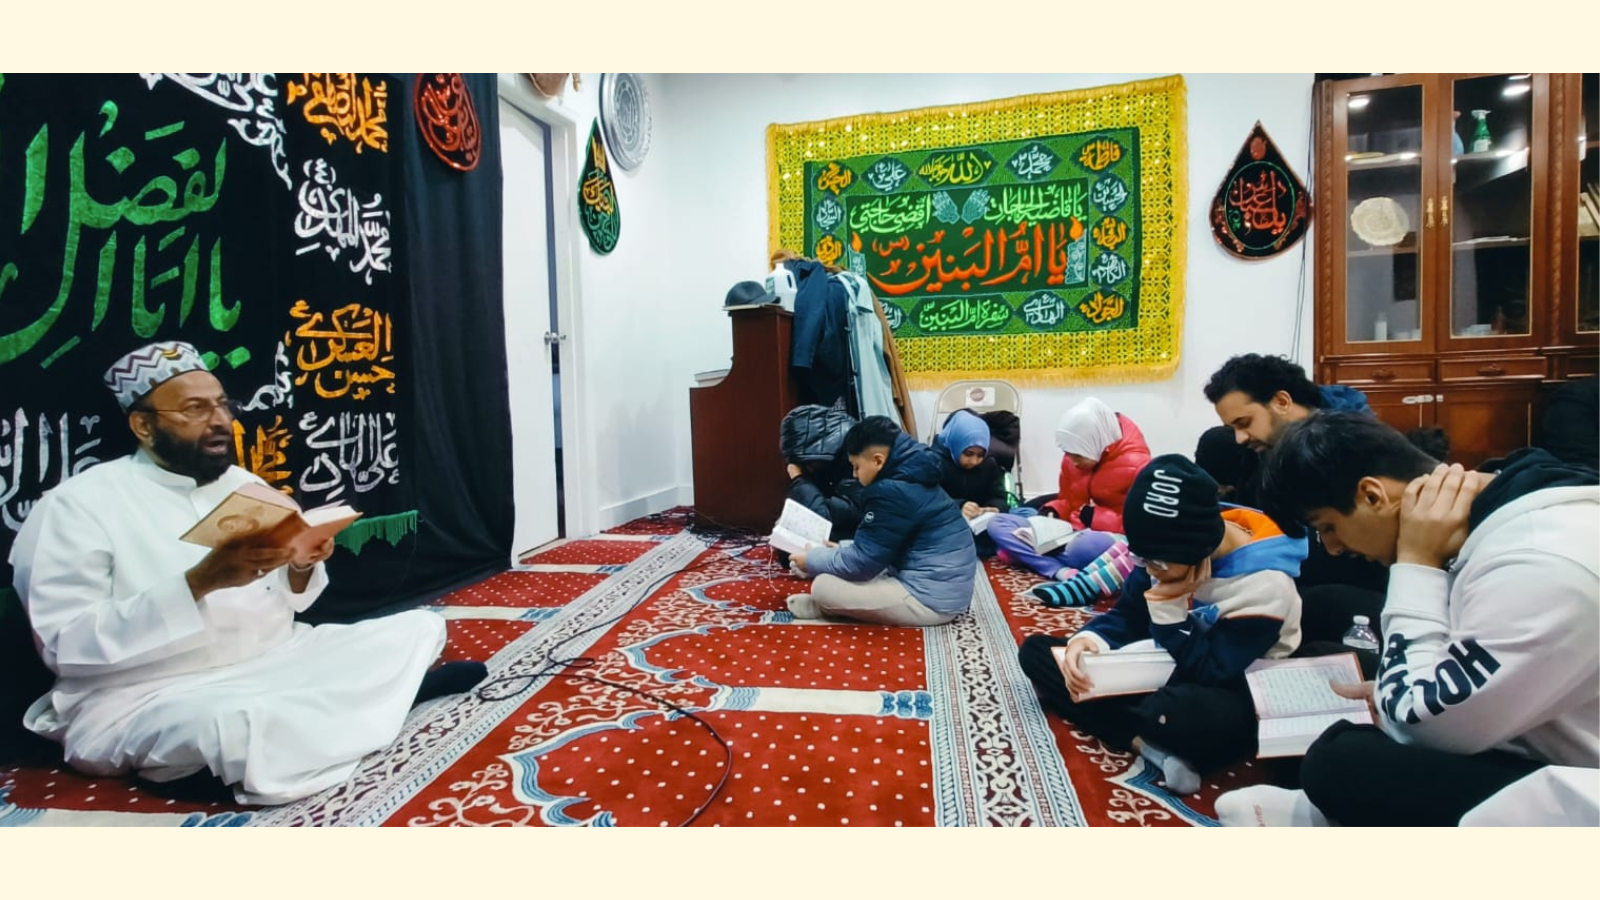 A Sunday Children’s Quiz With a Twist, Ft. Imams, Namaz & Ethics